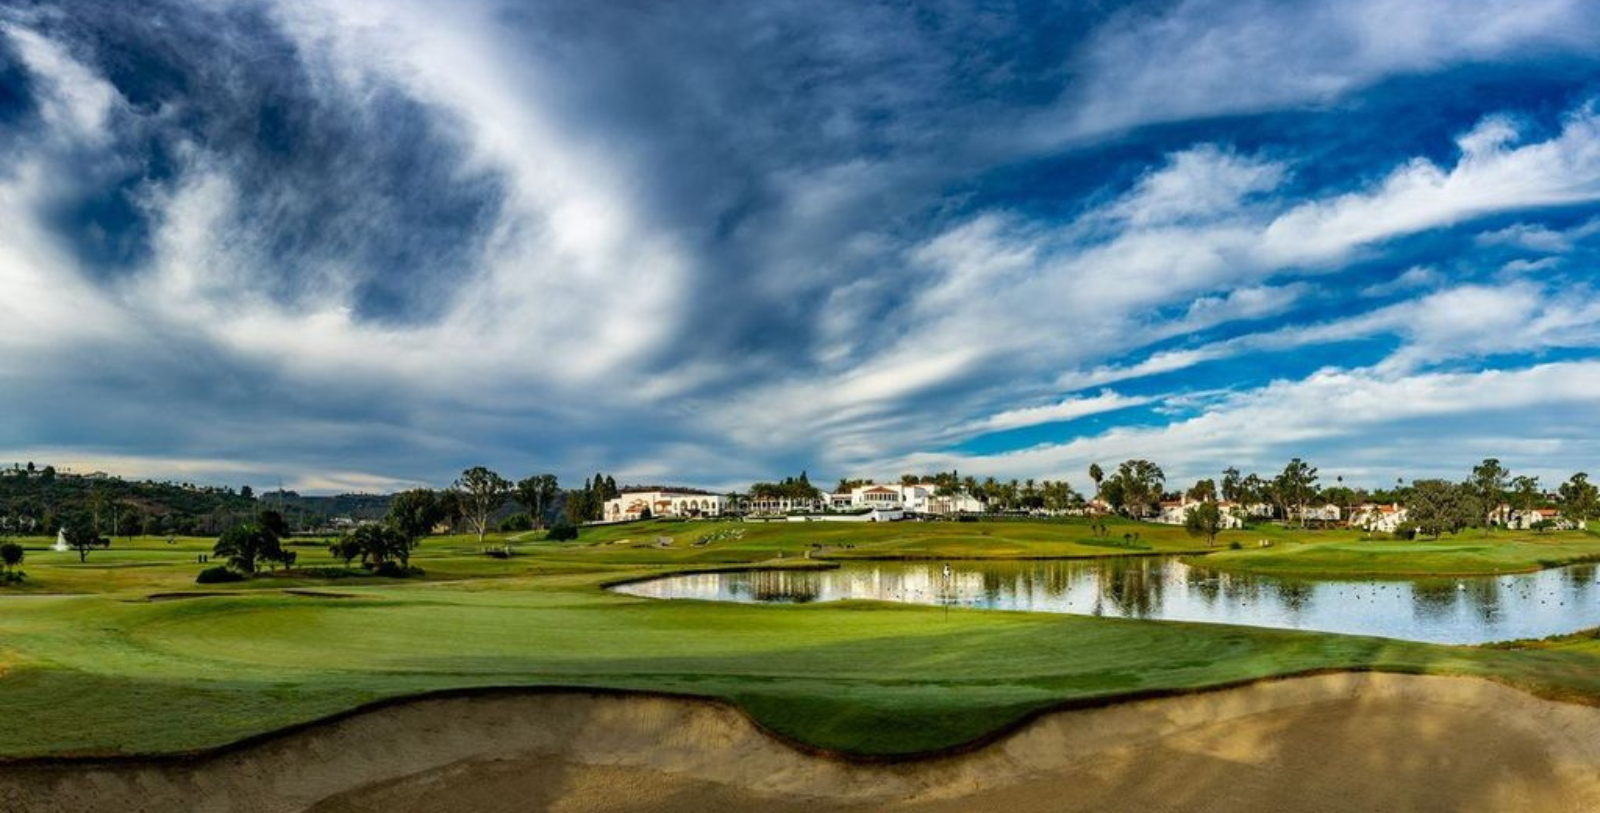 Experience a round of golf or a tennis match on the famous courses and courts of the Omni La Costa Resort.